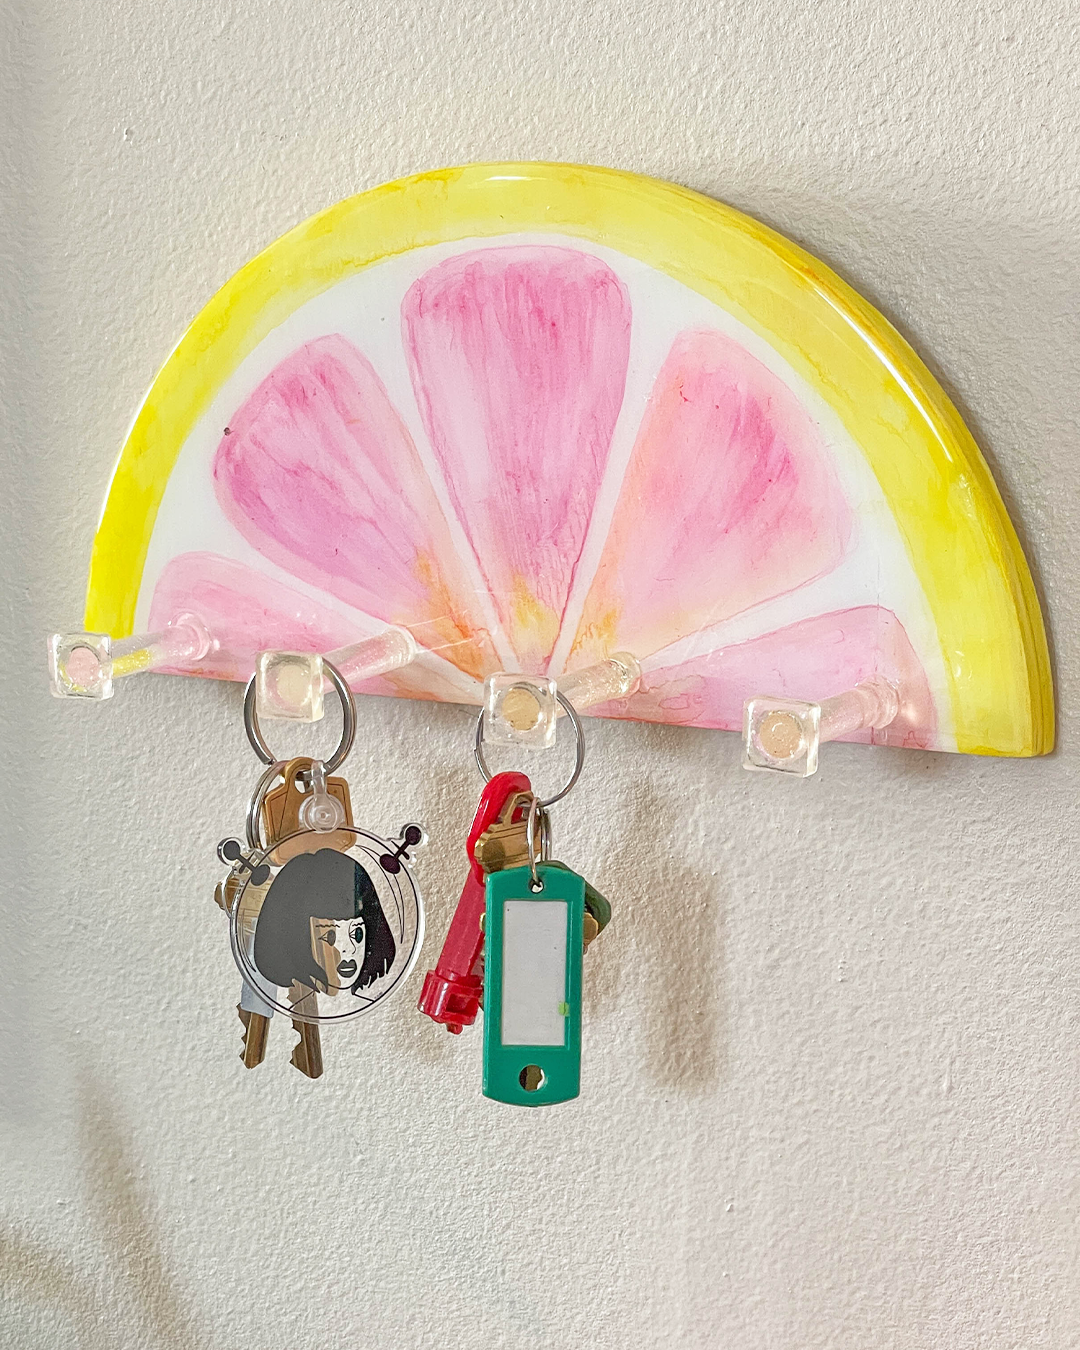 Innovative and artistic key holder resembling a slice of pink grapefruit on a wall.